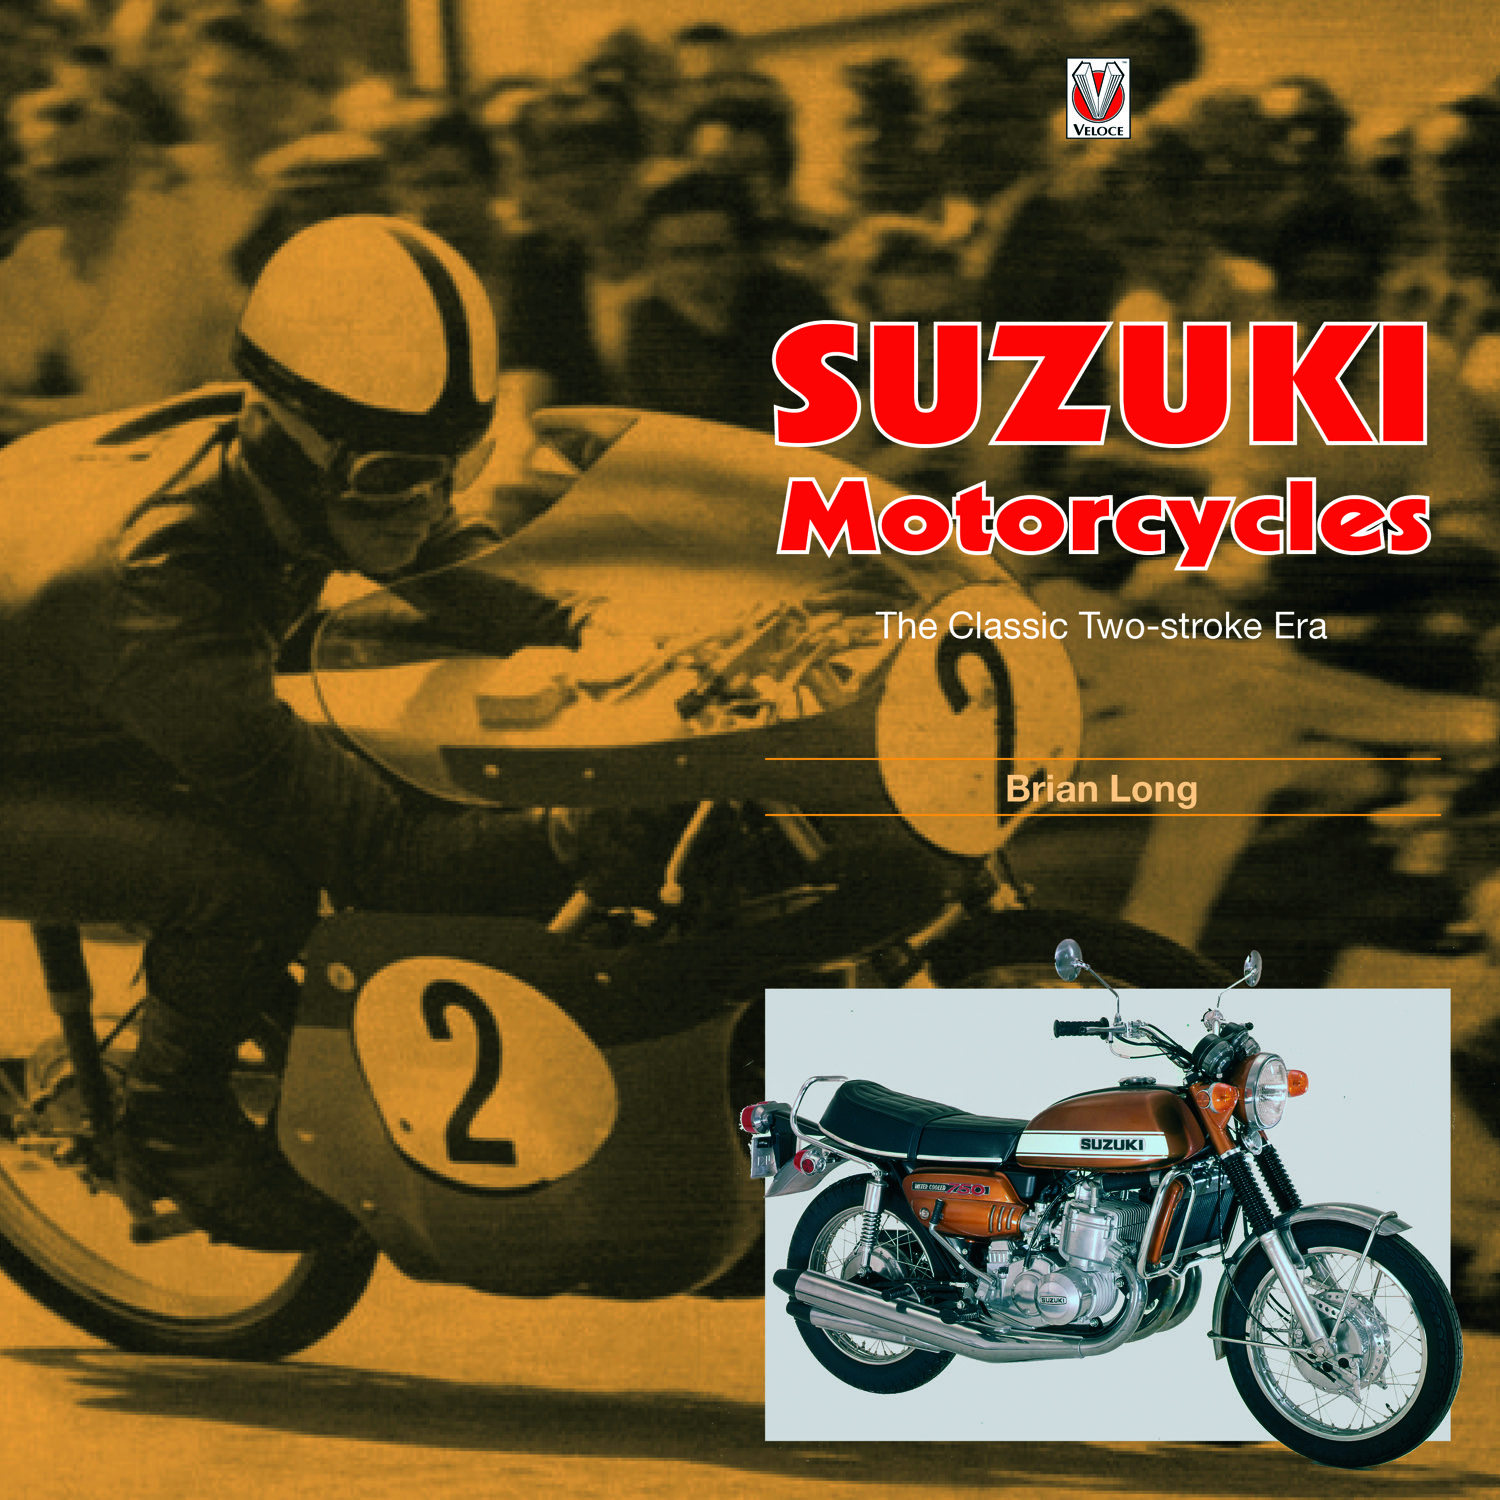 Suzuki Motorcycles - The Classic Two-stroke Era – by Brian Long